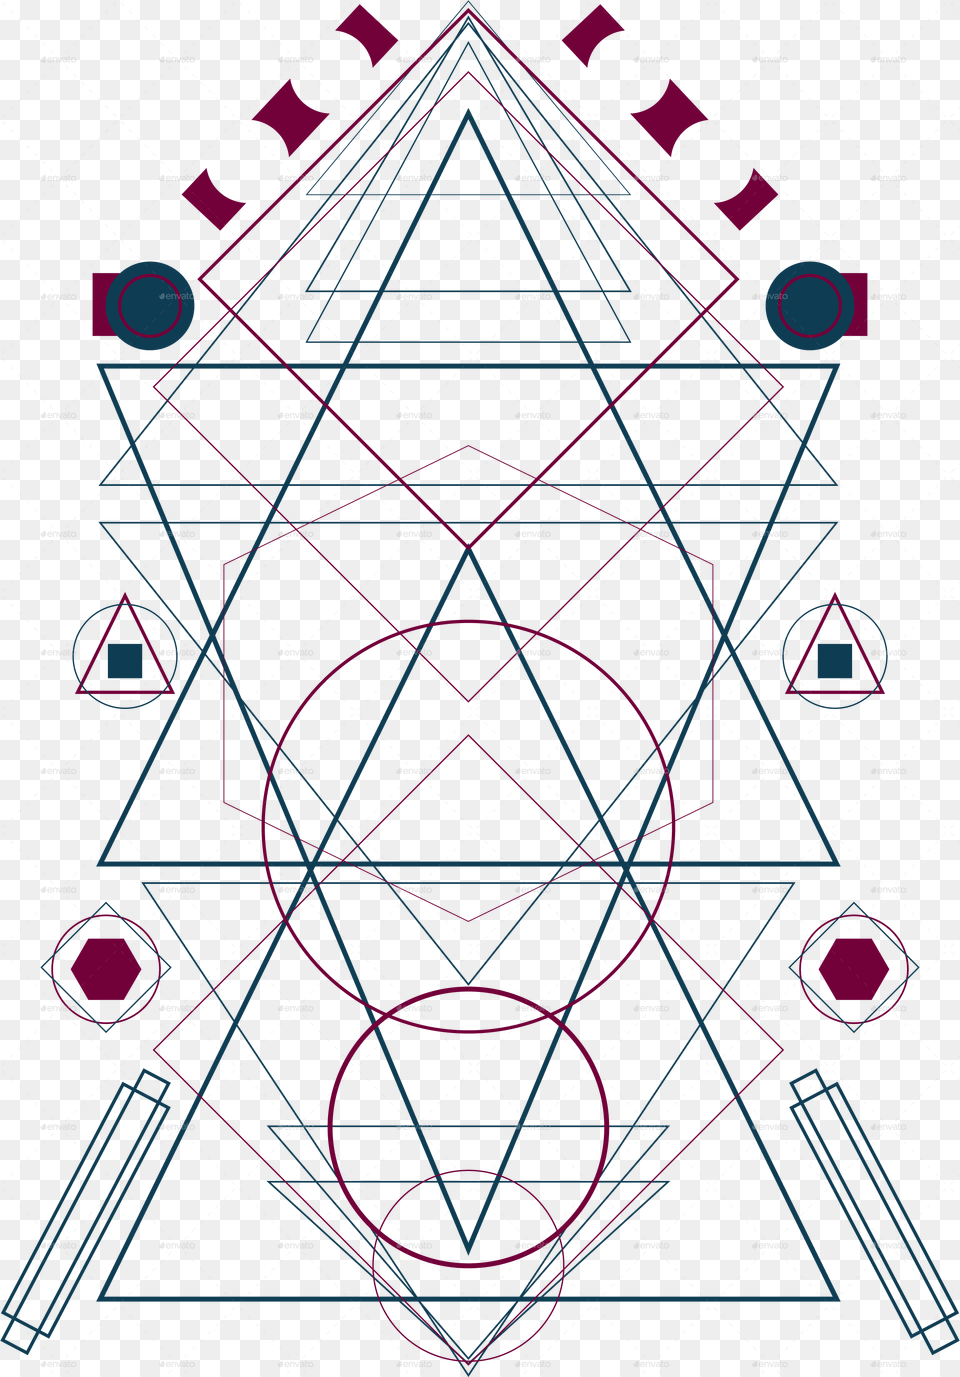 The Myhtical Lion Angry Sacred Geometry Triangle, Cad Diagram, Diagram, Blackboard Free Png Download